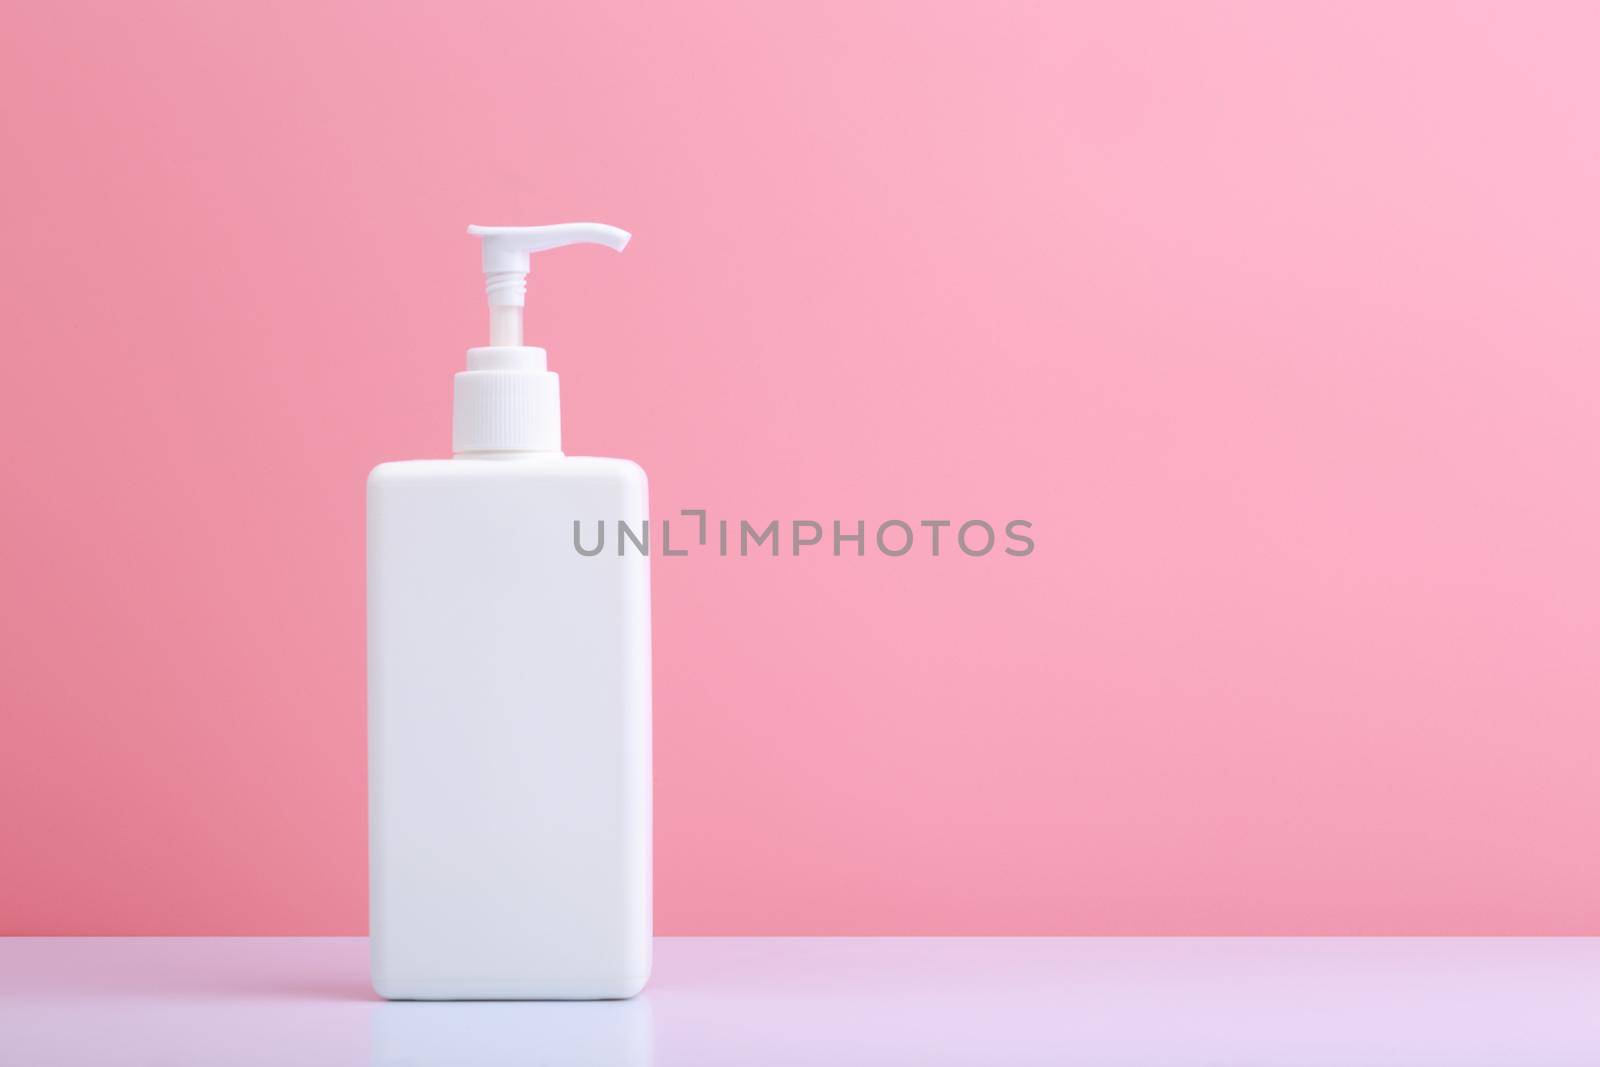 Body cream, gel or lotion in tall white tube with dispenser against pink background with copy space.Concept of body care and beauty products for moisturizing, hydration and exfoliation 